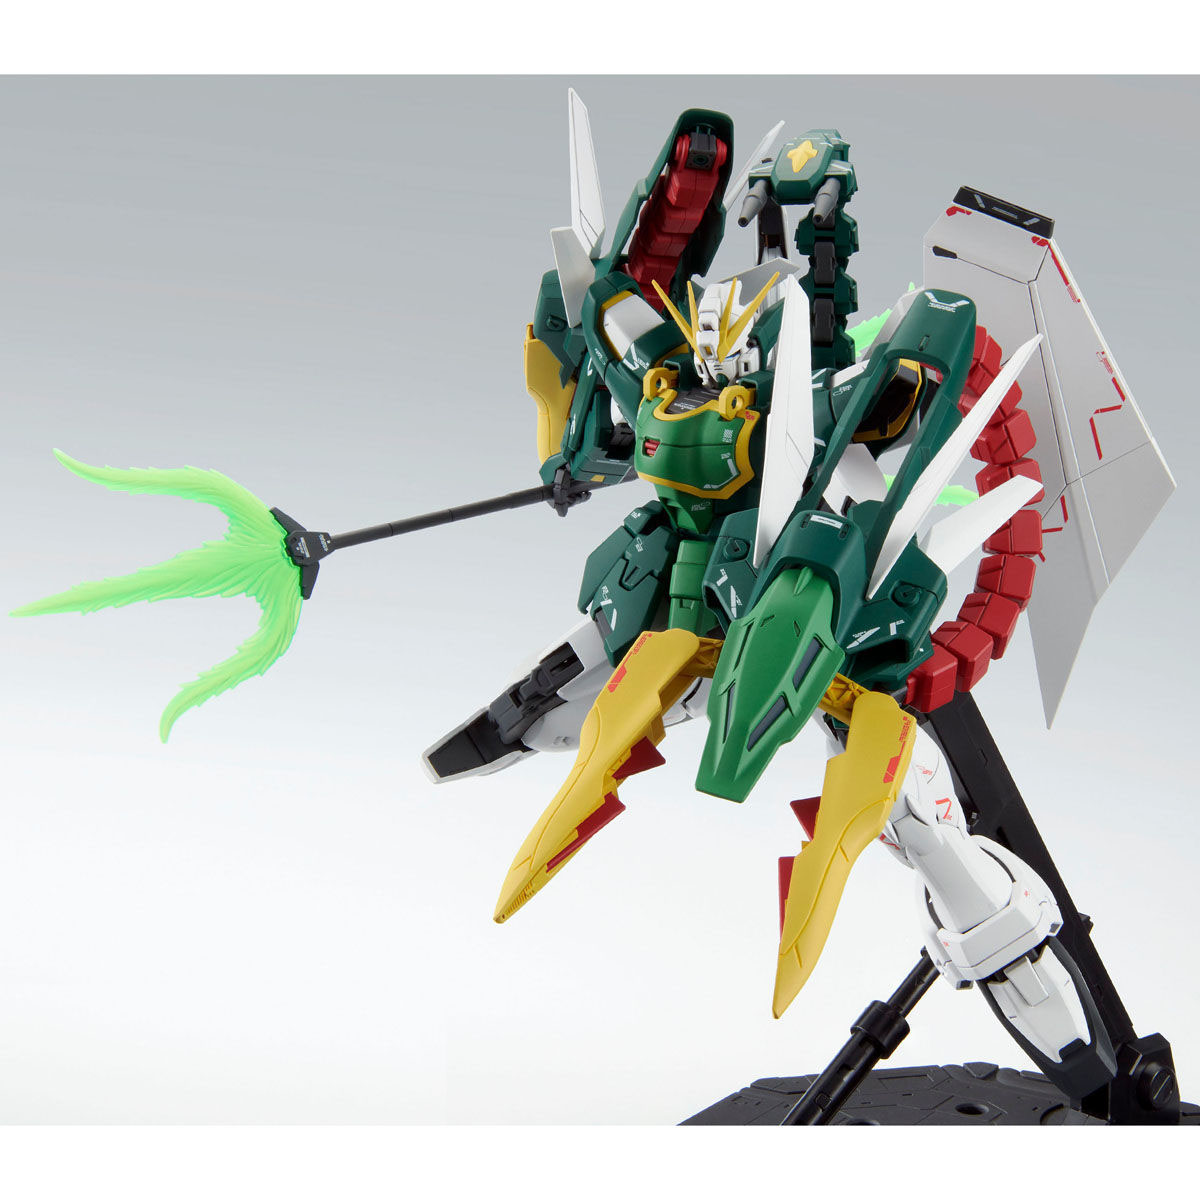 MG 1/100 EXPANSION PARTS SET for MOBILE SUIT GUNDAM W EW SERIES (The Glory of Losers Ver.) [Dec 2021 Delivery]